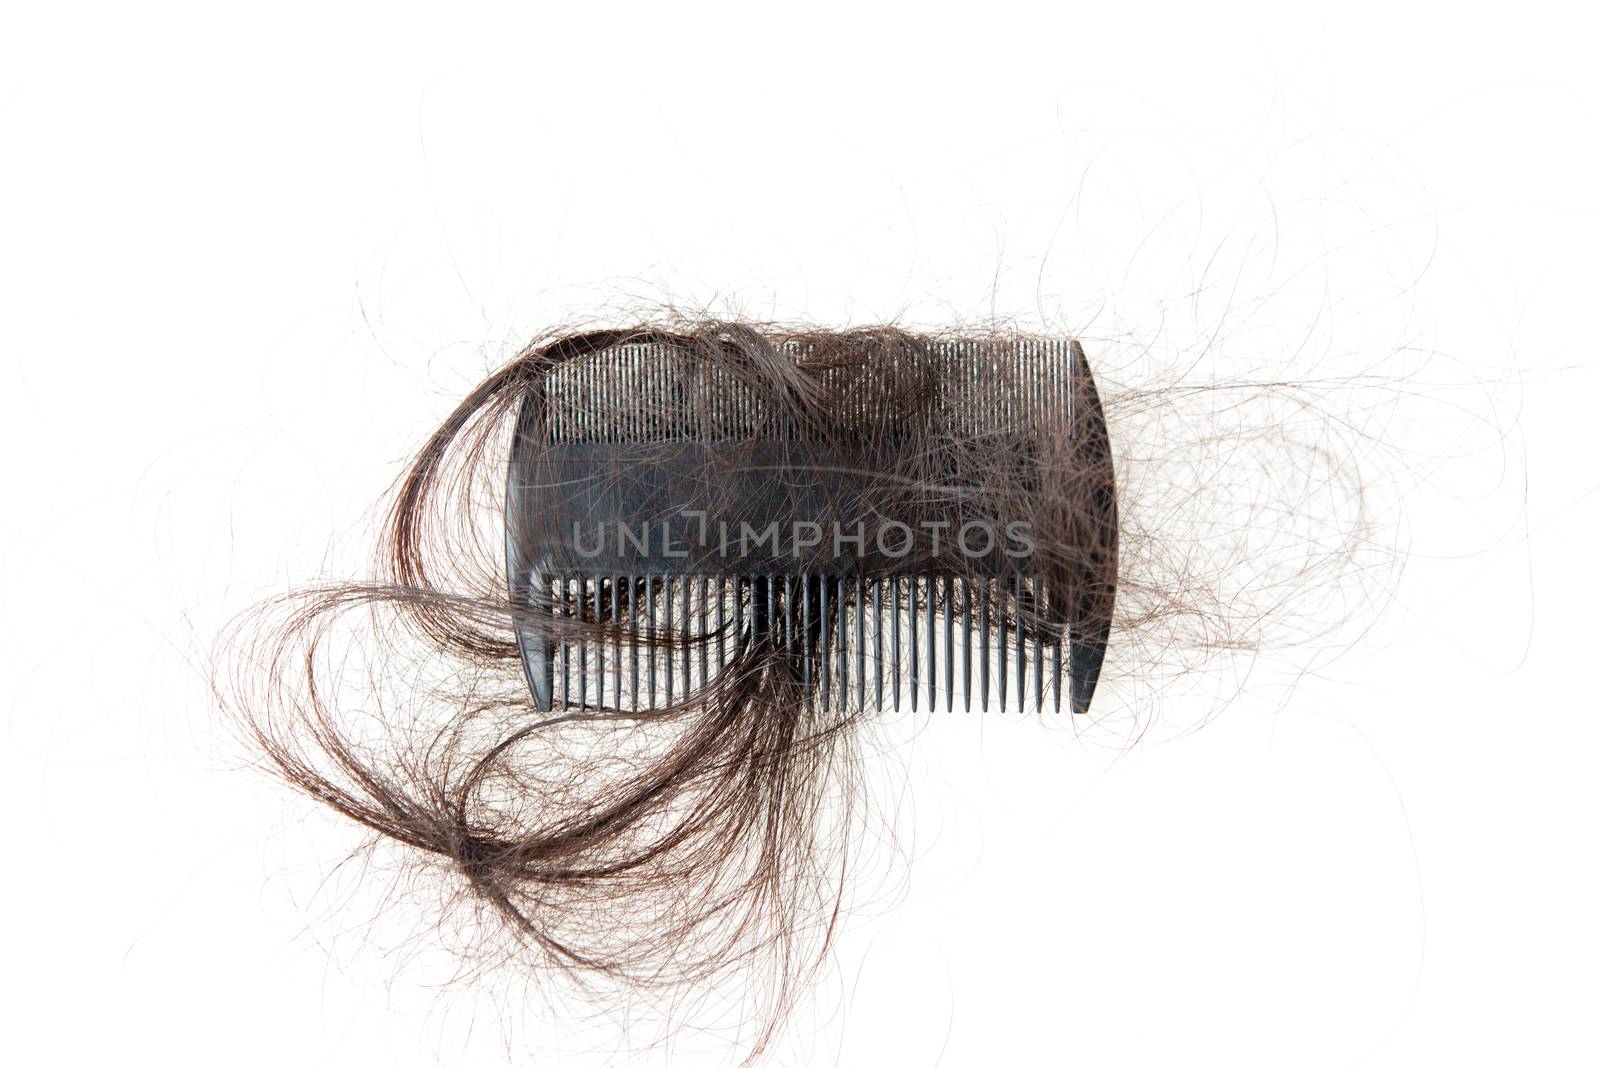 Hairloss problem. Flat lay top view comb with lost hair on it, isolated on white background.